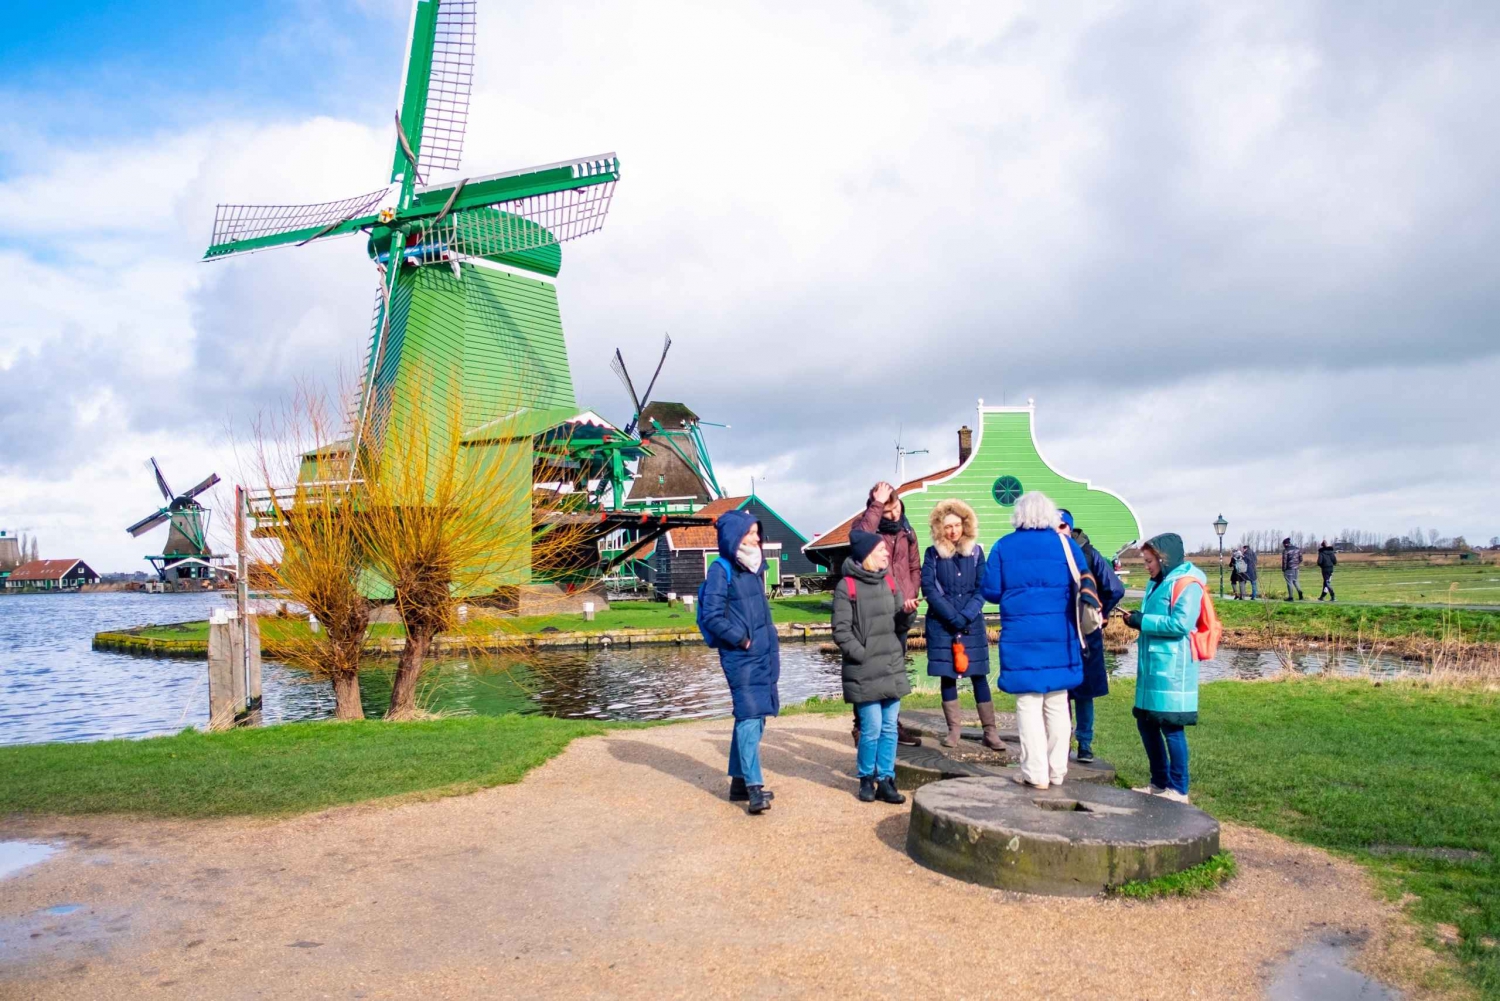 Half-Day Private Guided Sightseeing Tour of Zaanse Schans